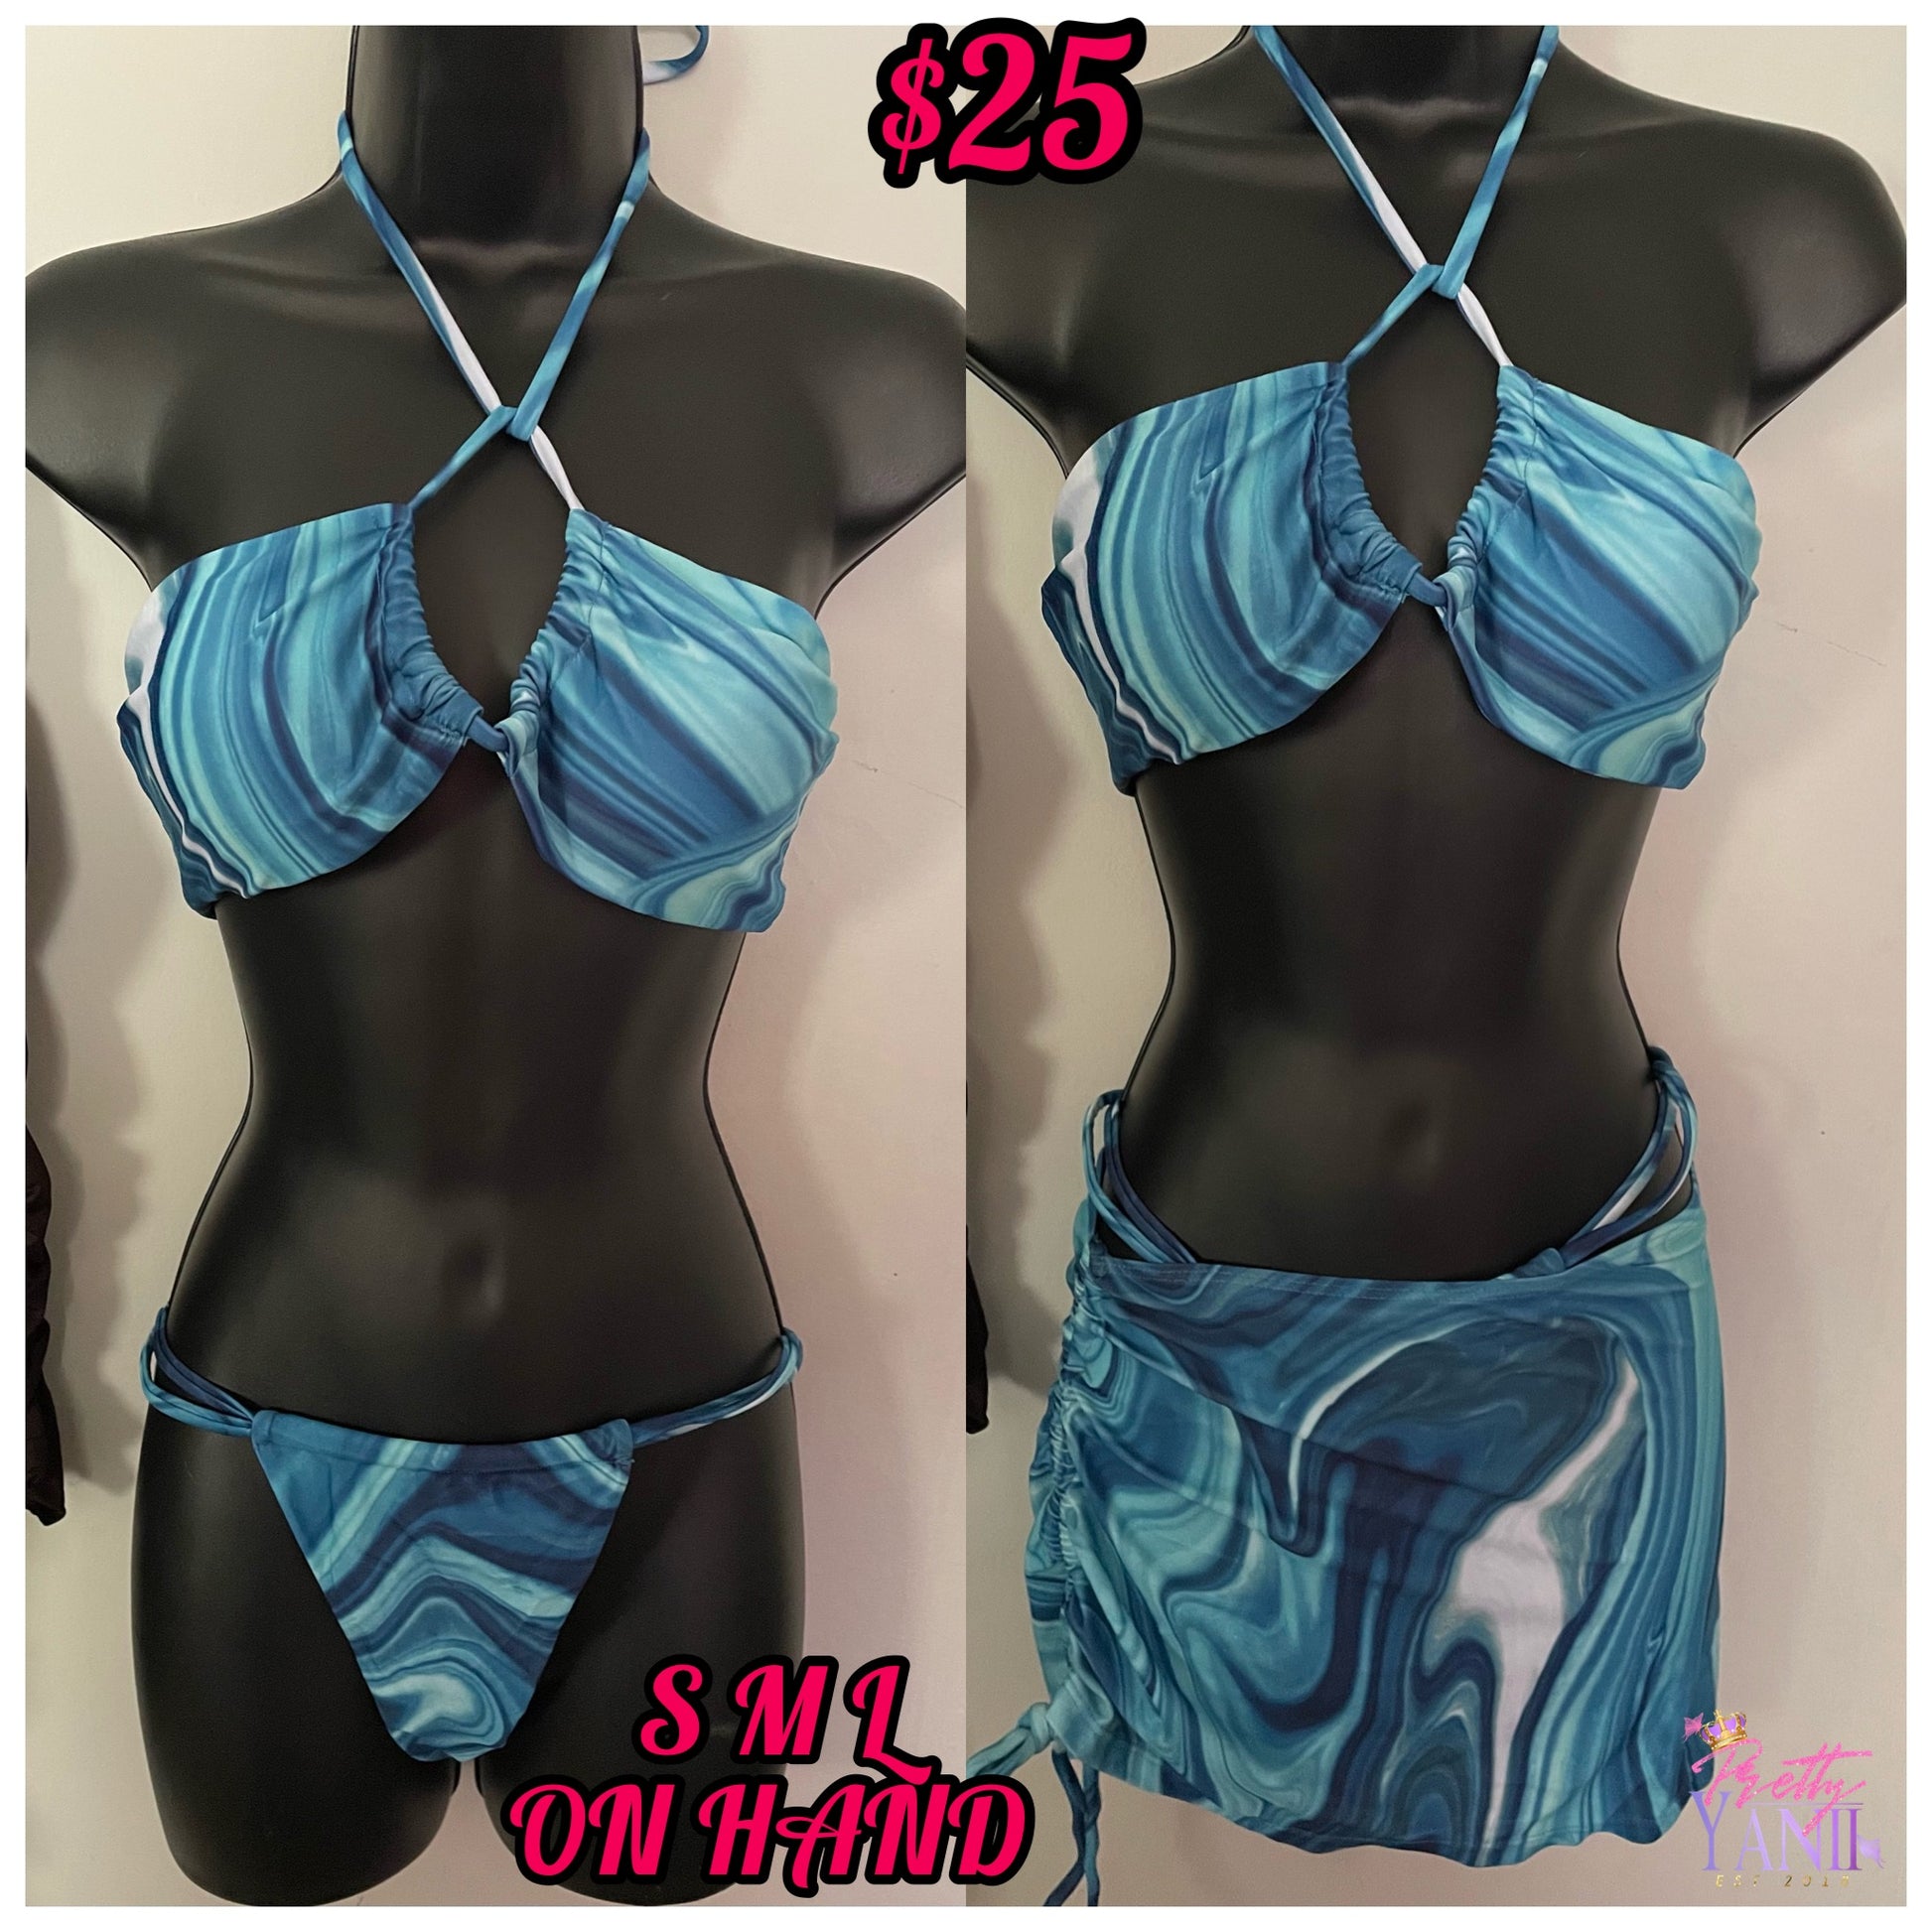 three-piece blue stripe thong bikini swimsuit and drawstring front cover-up skirt